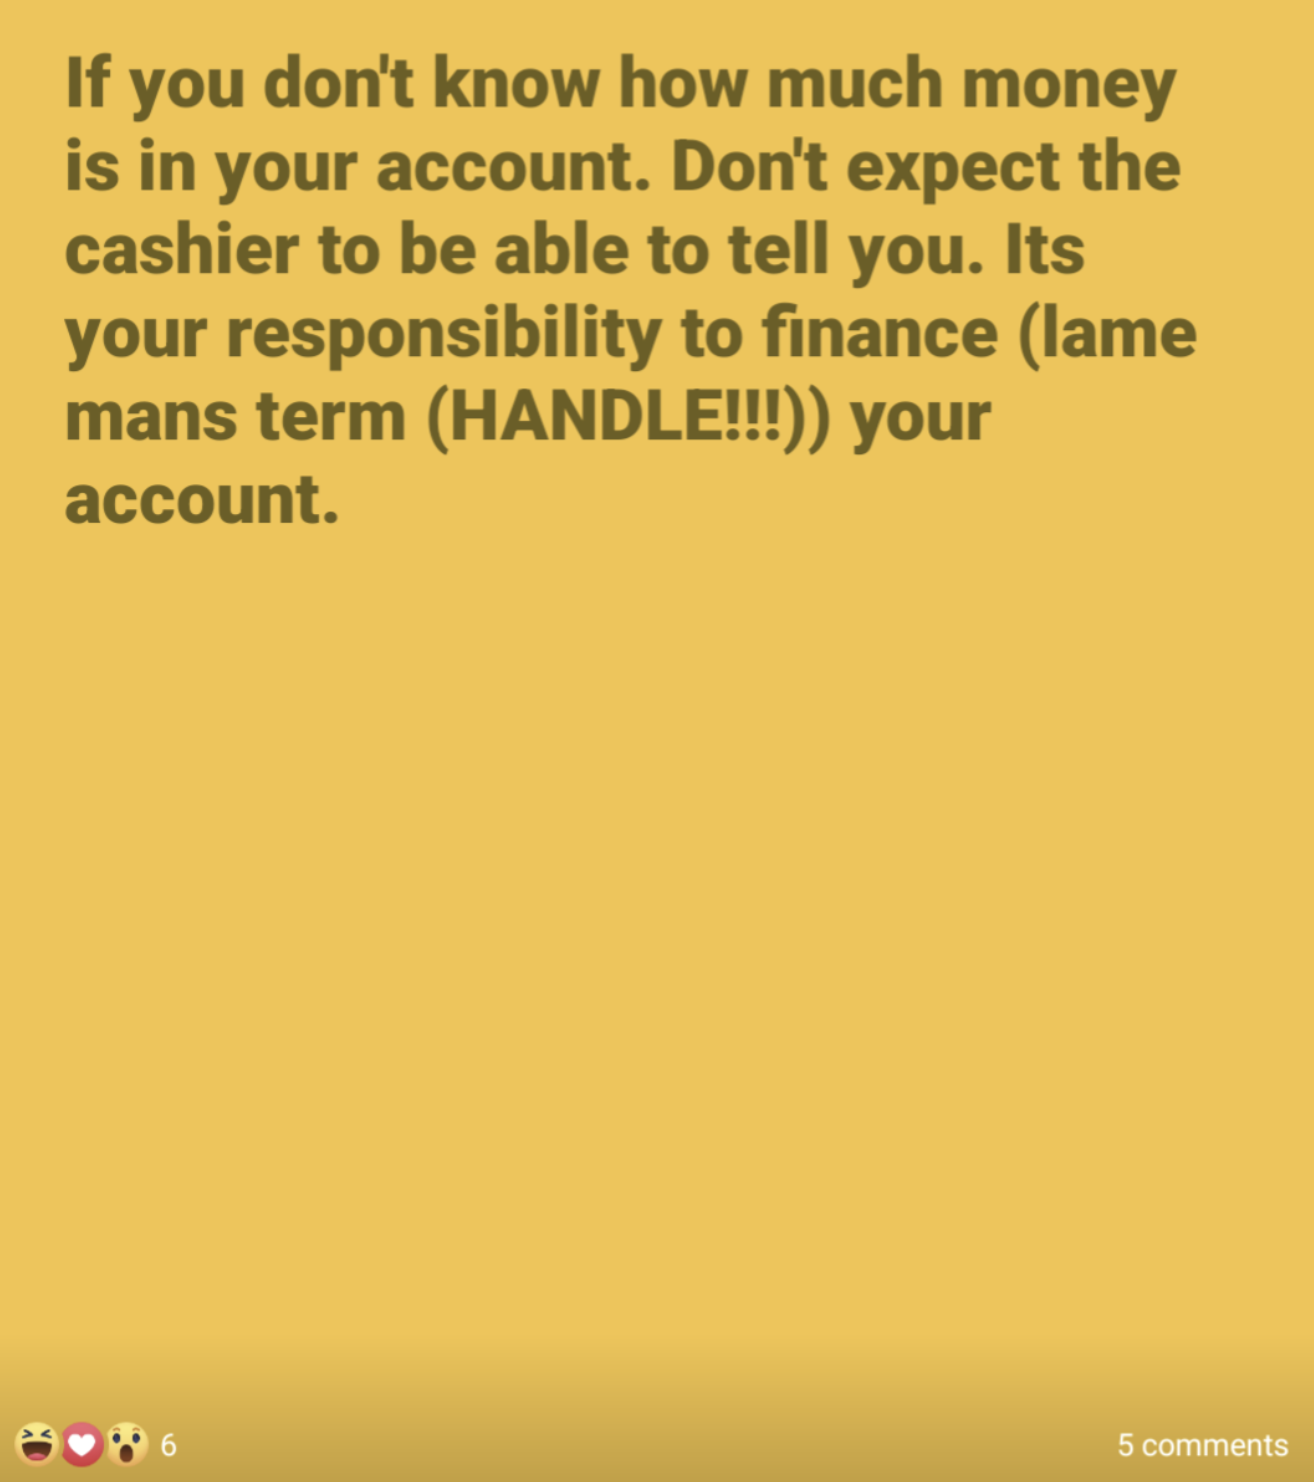 screenshot - If you don't know how much money is in your account. Don't expect the cashier to be able to tell you. Its your responsibility to finance lame mans term Handle!!! your account. 6 5